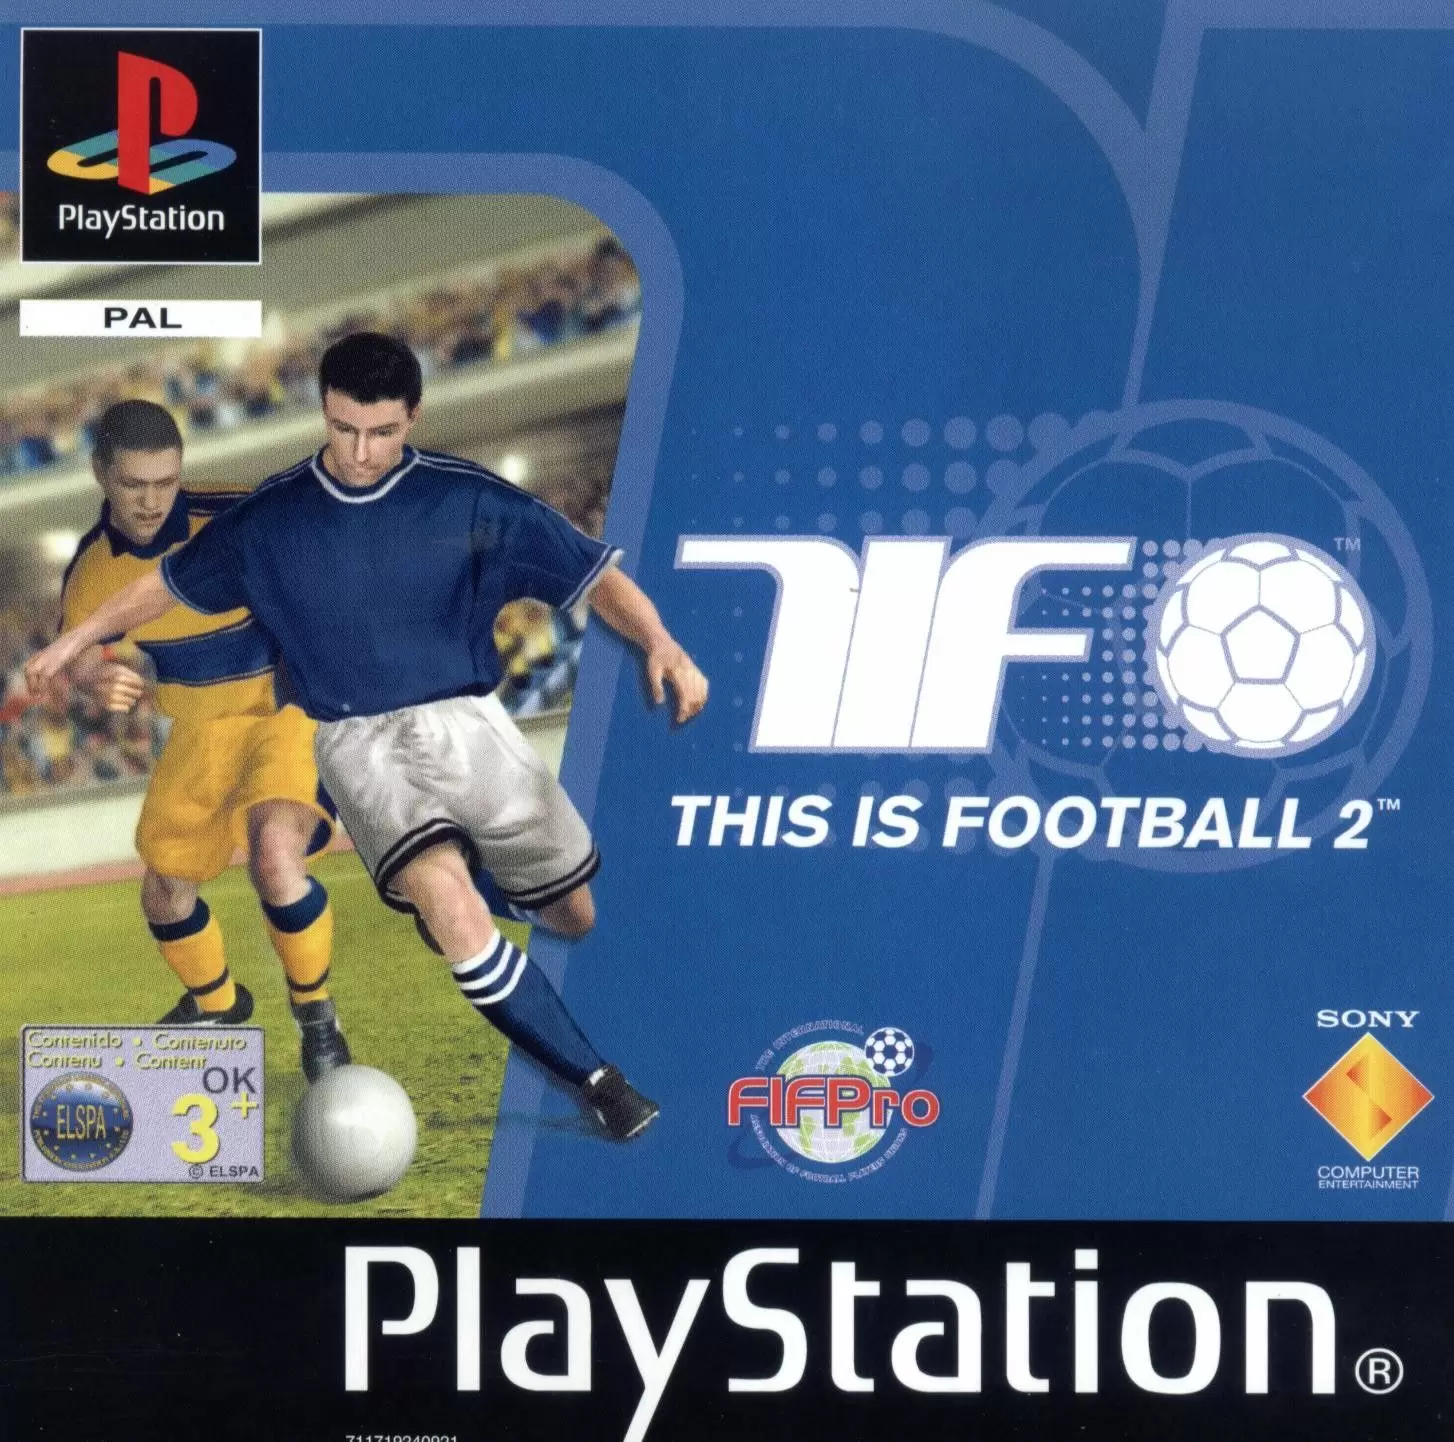 Playstation games - This is Football 2